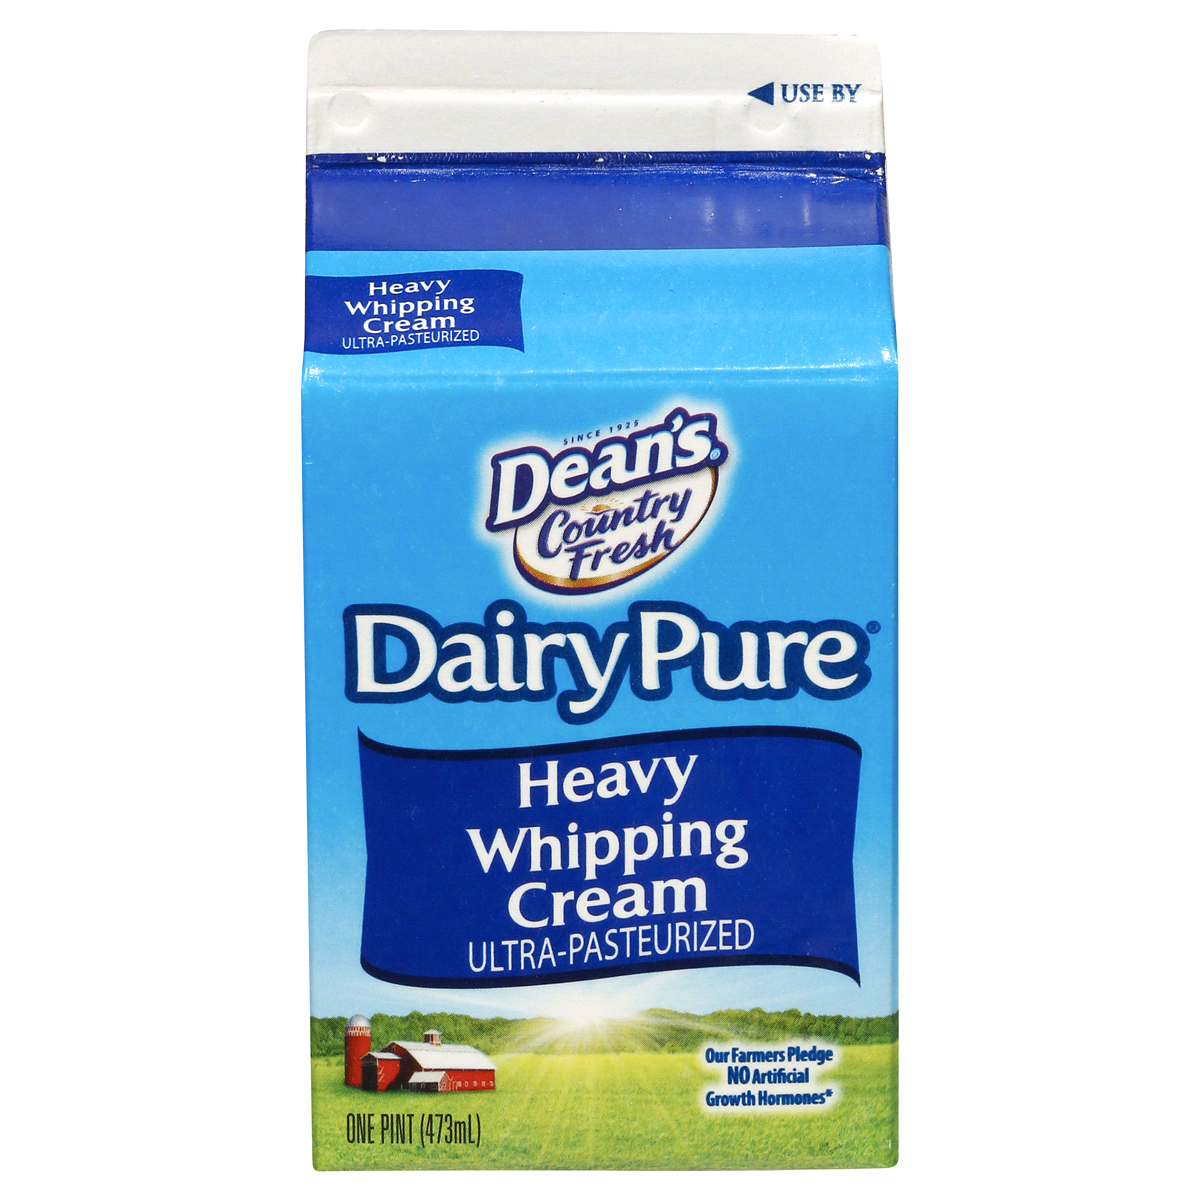 slide 3 of 6, Dairy Pure Cream Heavy Whipping Ultra-Pasteurized Pint, 1 pint